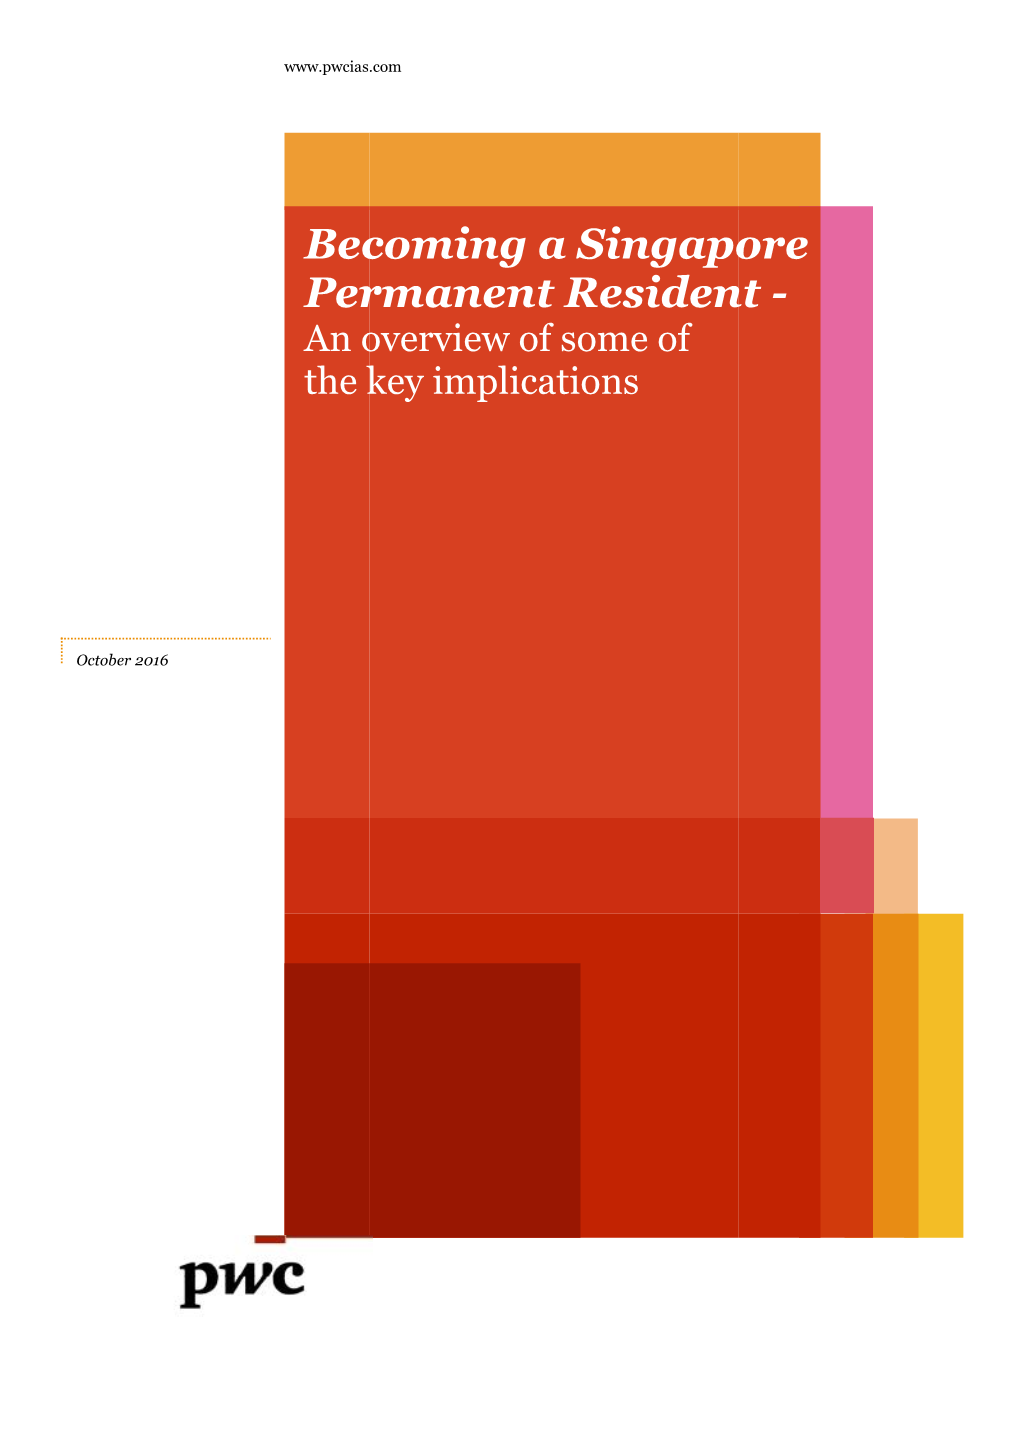 Becoming a Singapore Permanent Resident - an Overview of Some of the Key Implications